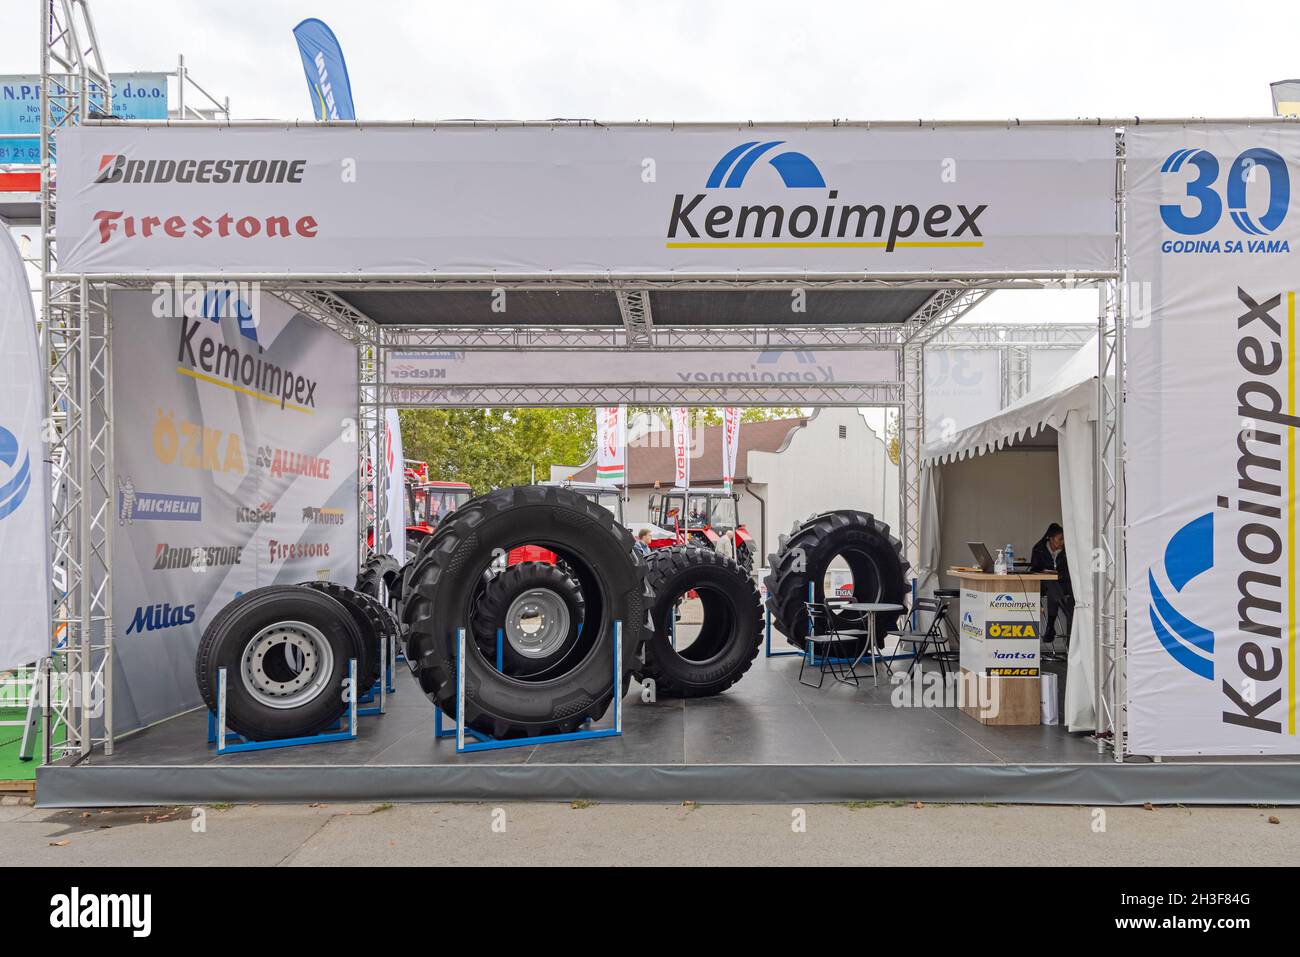 Novi Sad, Serbia - September 21, 2021: Bridgestone Firestone Tyres for Tractors and Combine Harvesters at Agriculture Expo Fair Kemoimpex Booth. Stock Photo